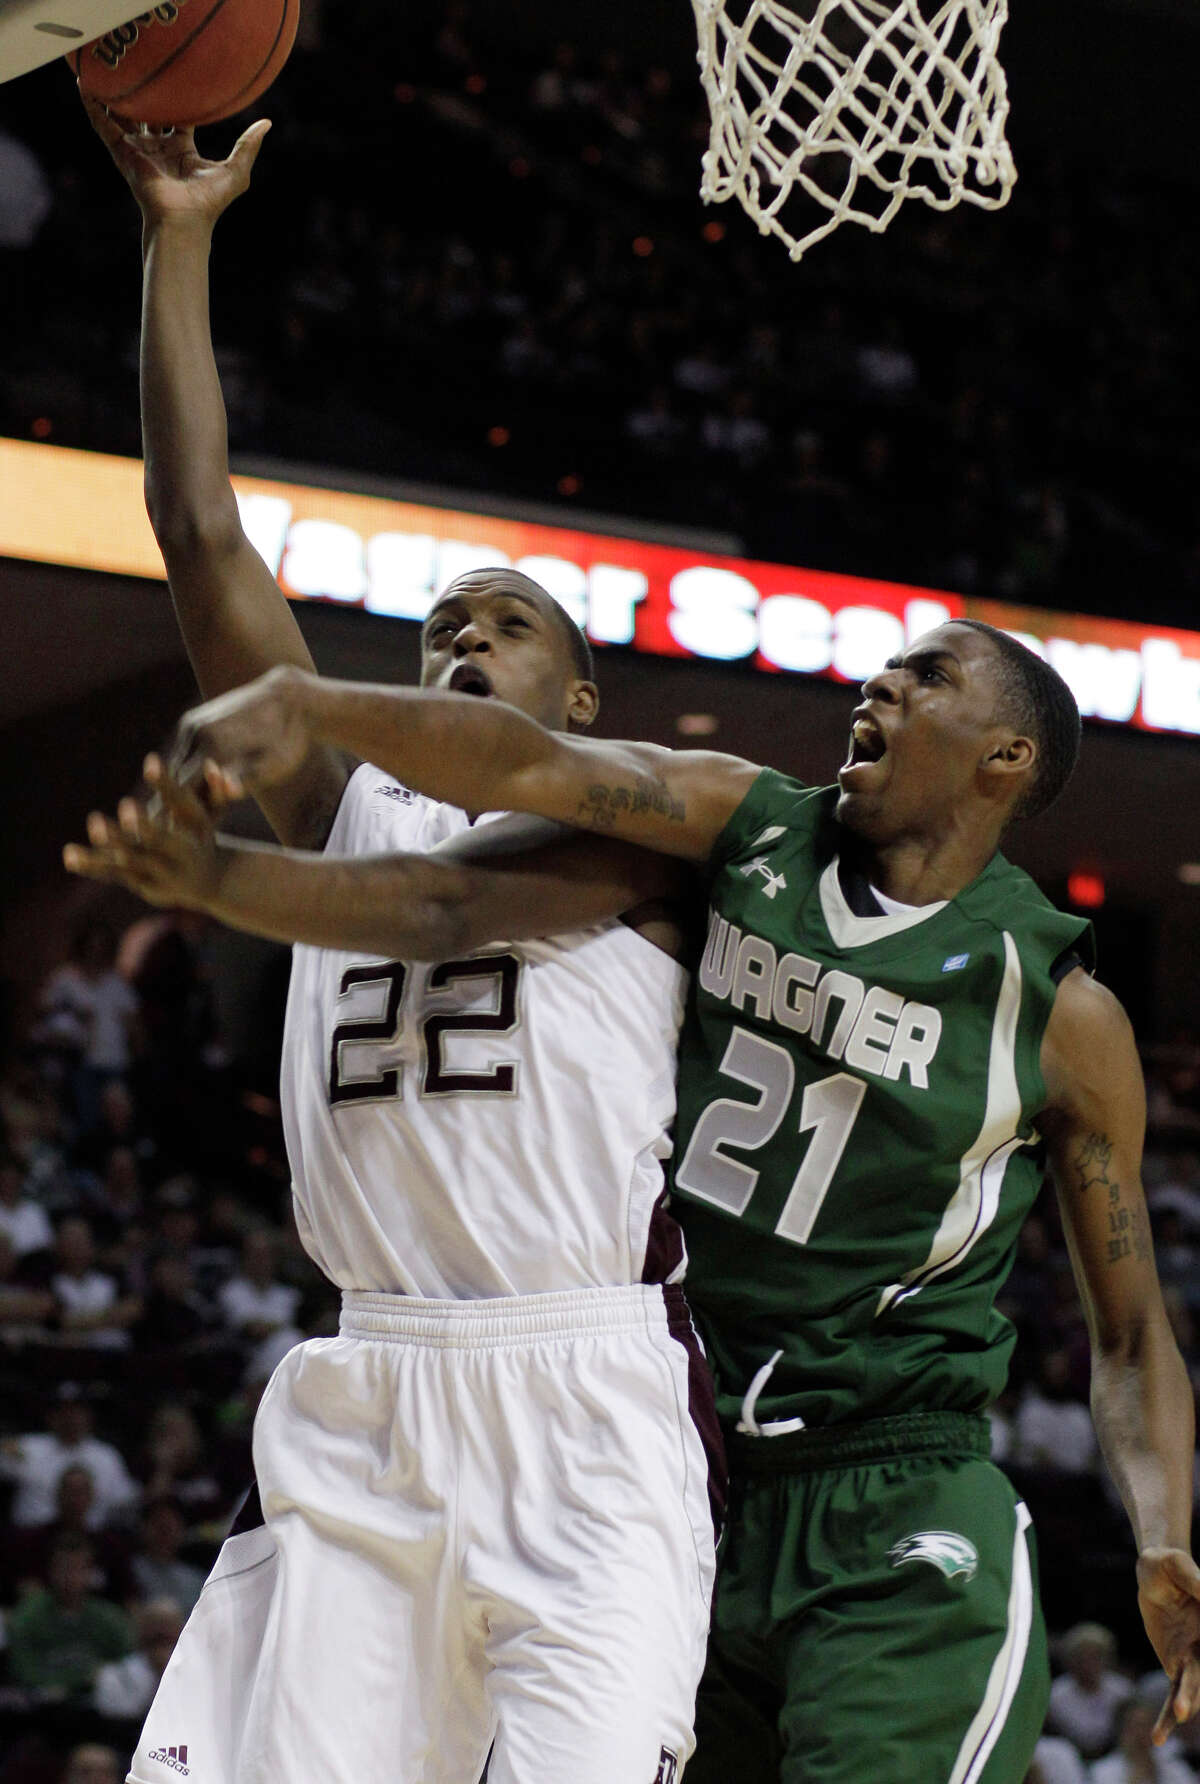 Texas A&M forward Khris Middleton is fouled by Wagner forward Orlando Parker during the first half of Tuesday's game in College Station.